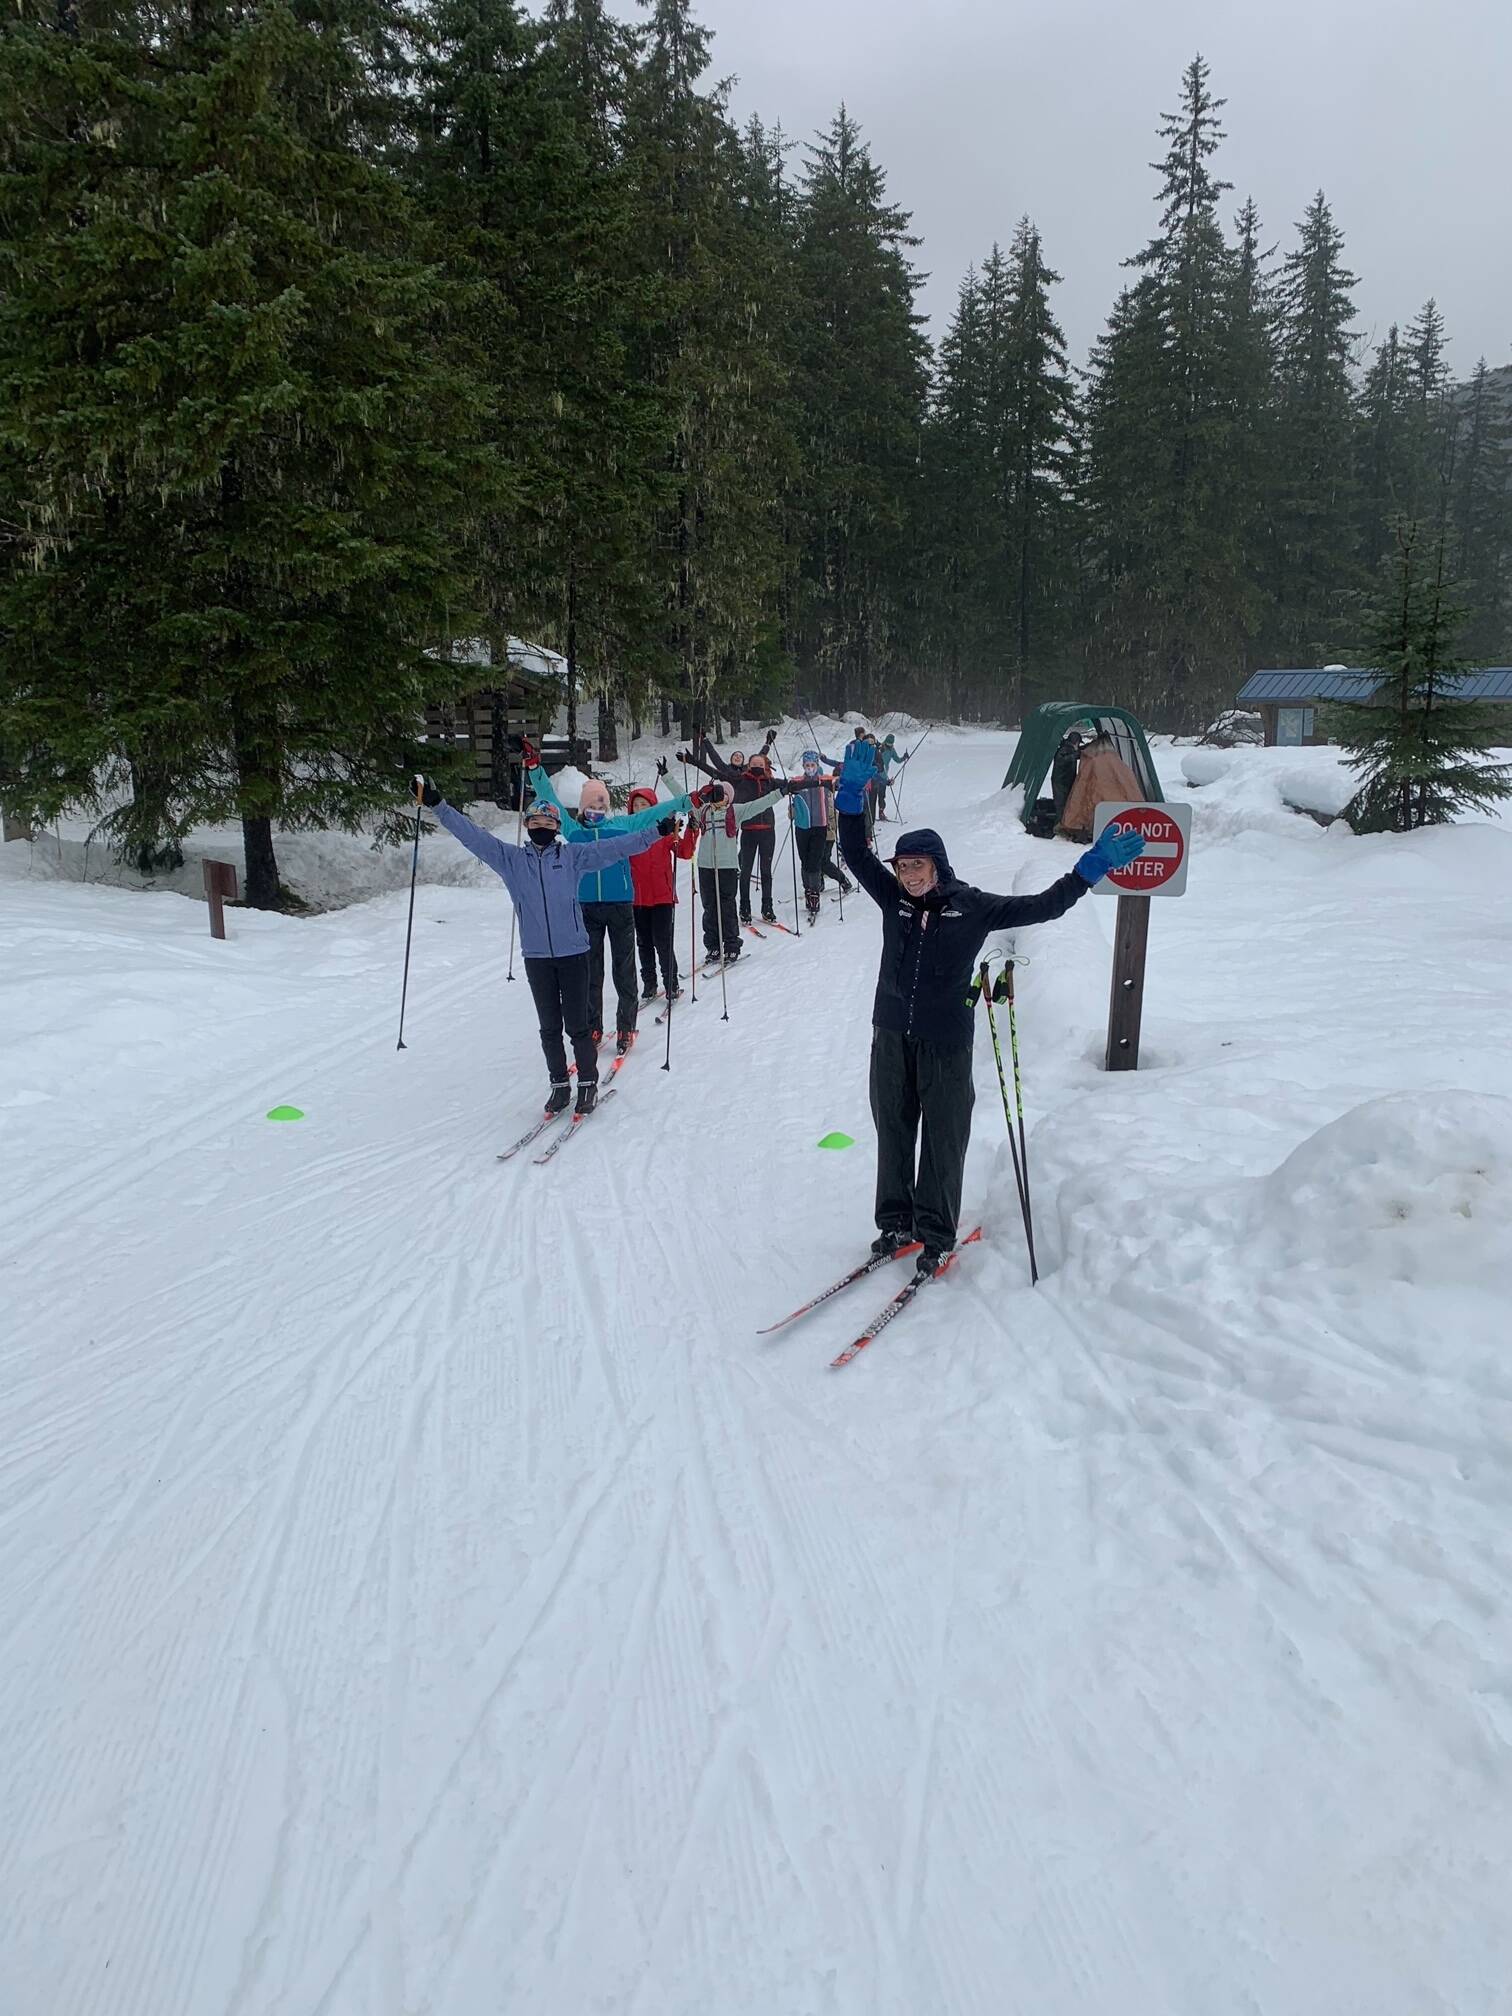 Courtesy Photo / Tristan Knutson-Lombardo 
Maddie Phaneuf, a Team USA biathlete, stands at the front of a line of skiers with her arms outstretched. Phaneuf was recently in town as a guest coach for Juneau Nordic Ski teams. Coaches said it’s excited to bring in professionals with outside perspective.